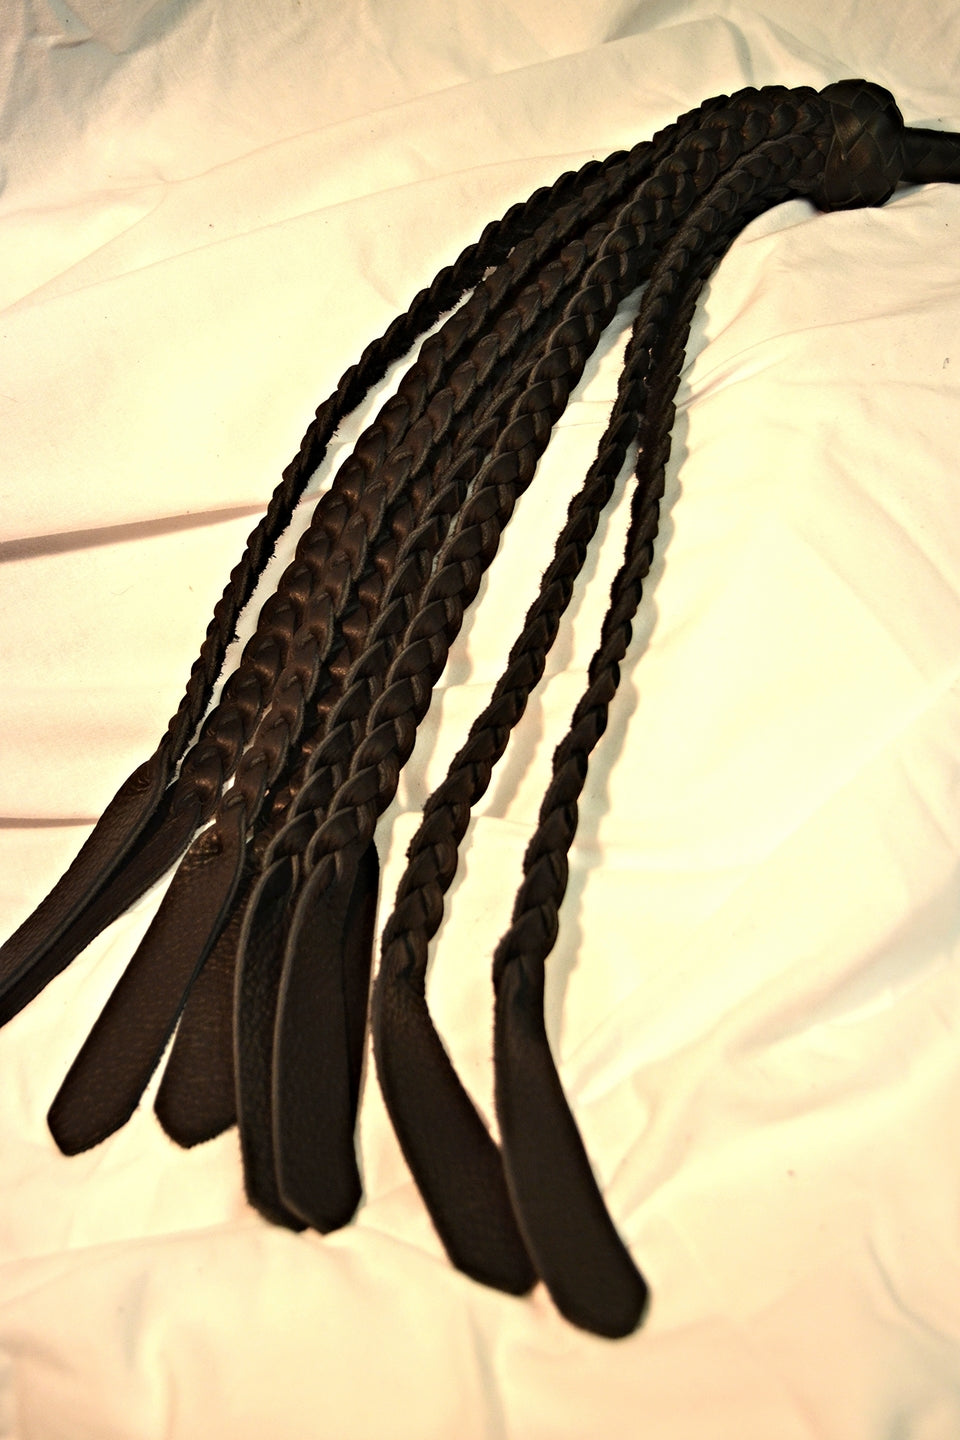 Black Buffalo Braid Flogger displayed so that you can see the ends better.